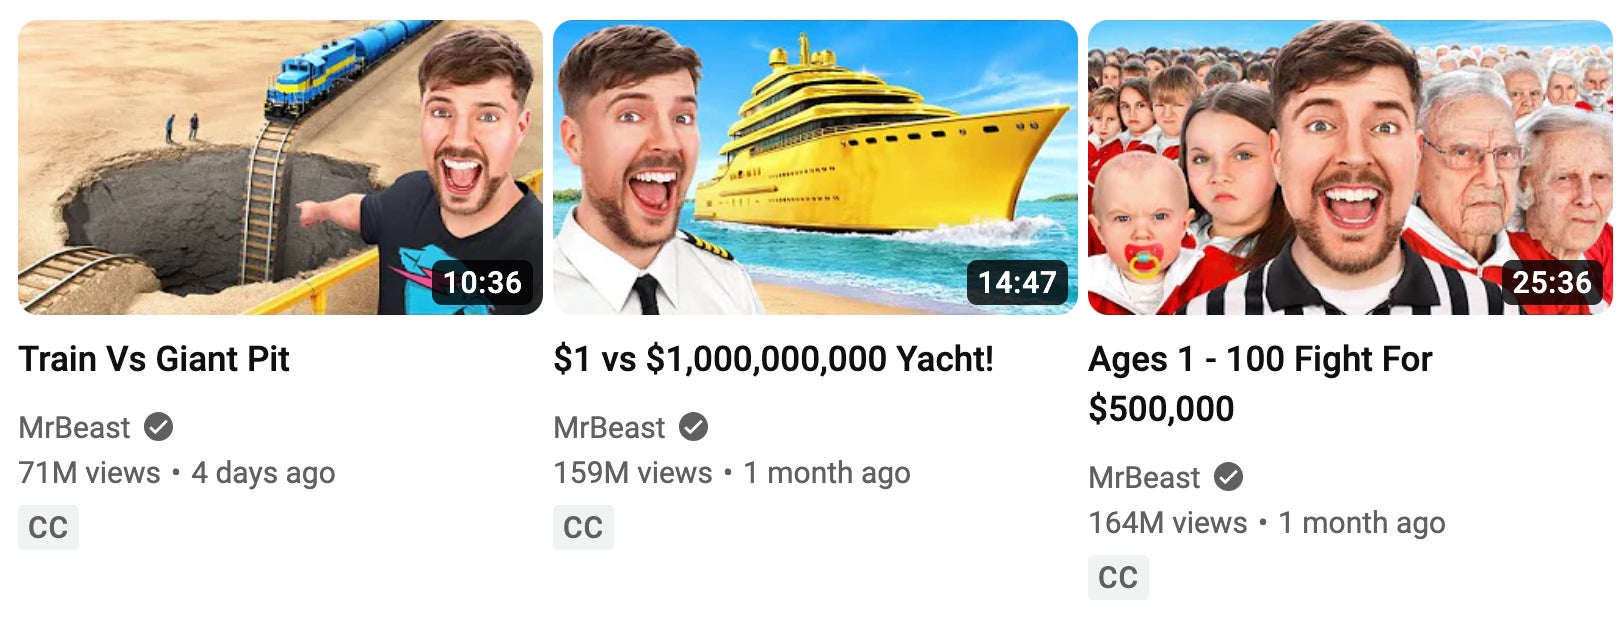 Three thumbnails from the YouTuber MrBeast's YouTube page, showing his exaggerated smile on each one, an expression known as YouTube face.